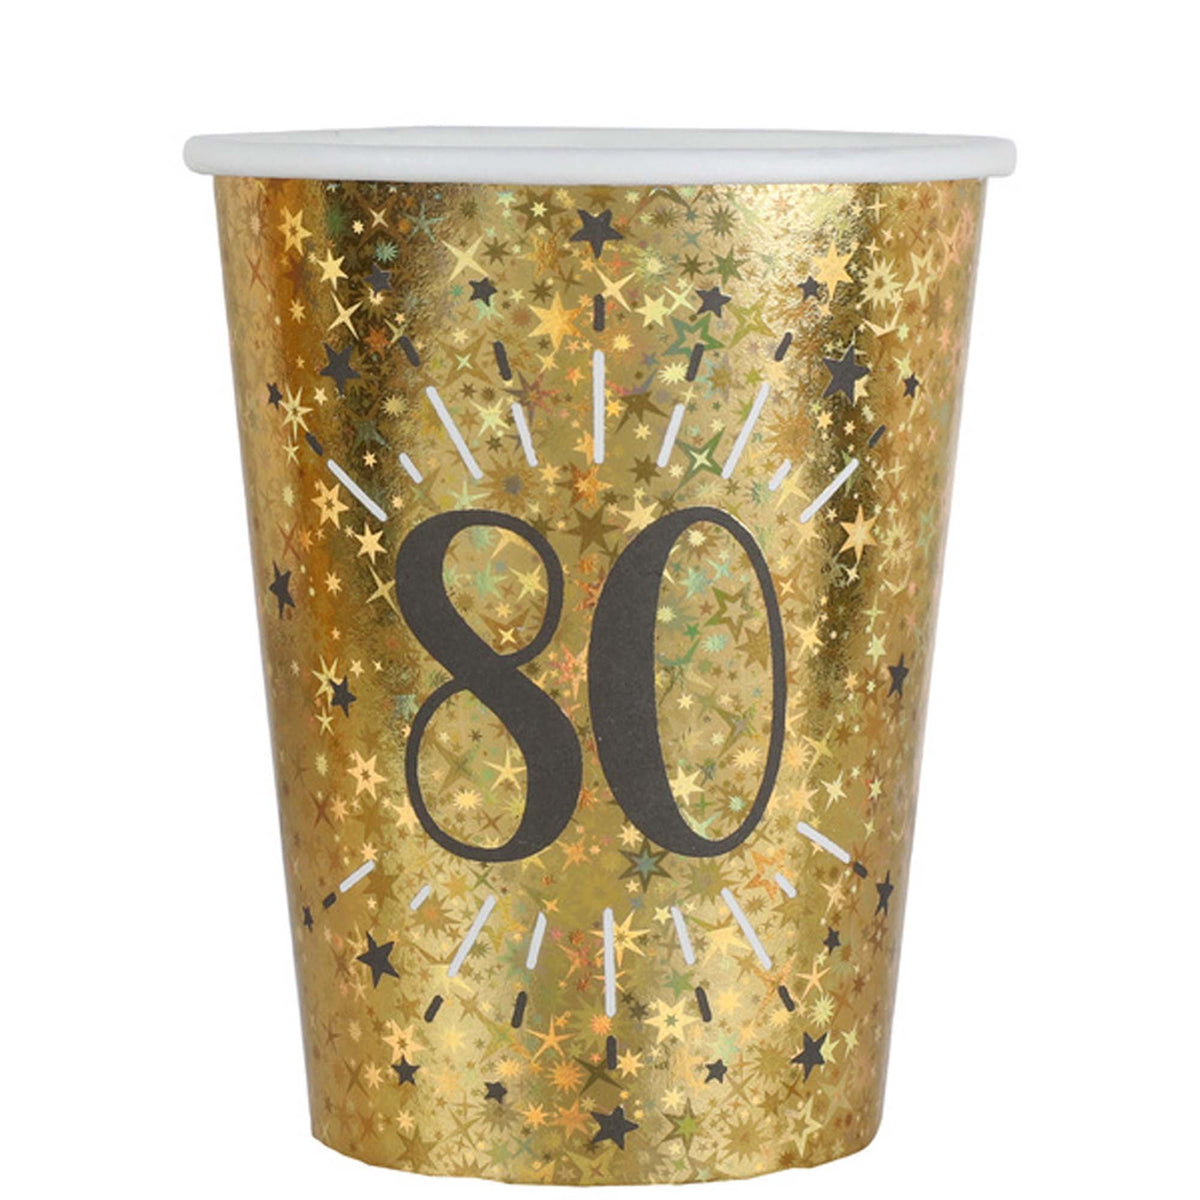 SANTEX Age Specific Birthday Gold 80th Birthday Party Paper Cups, 9 Oz, 10 Count 3660380055341